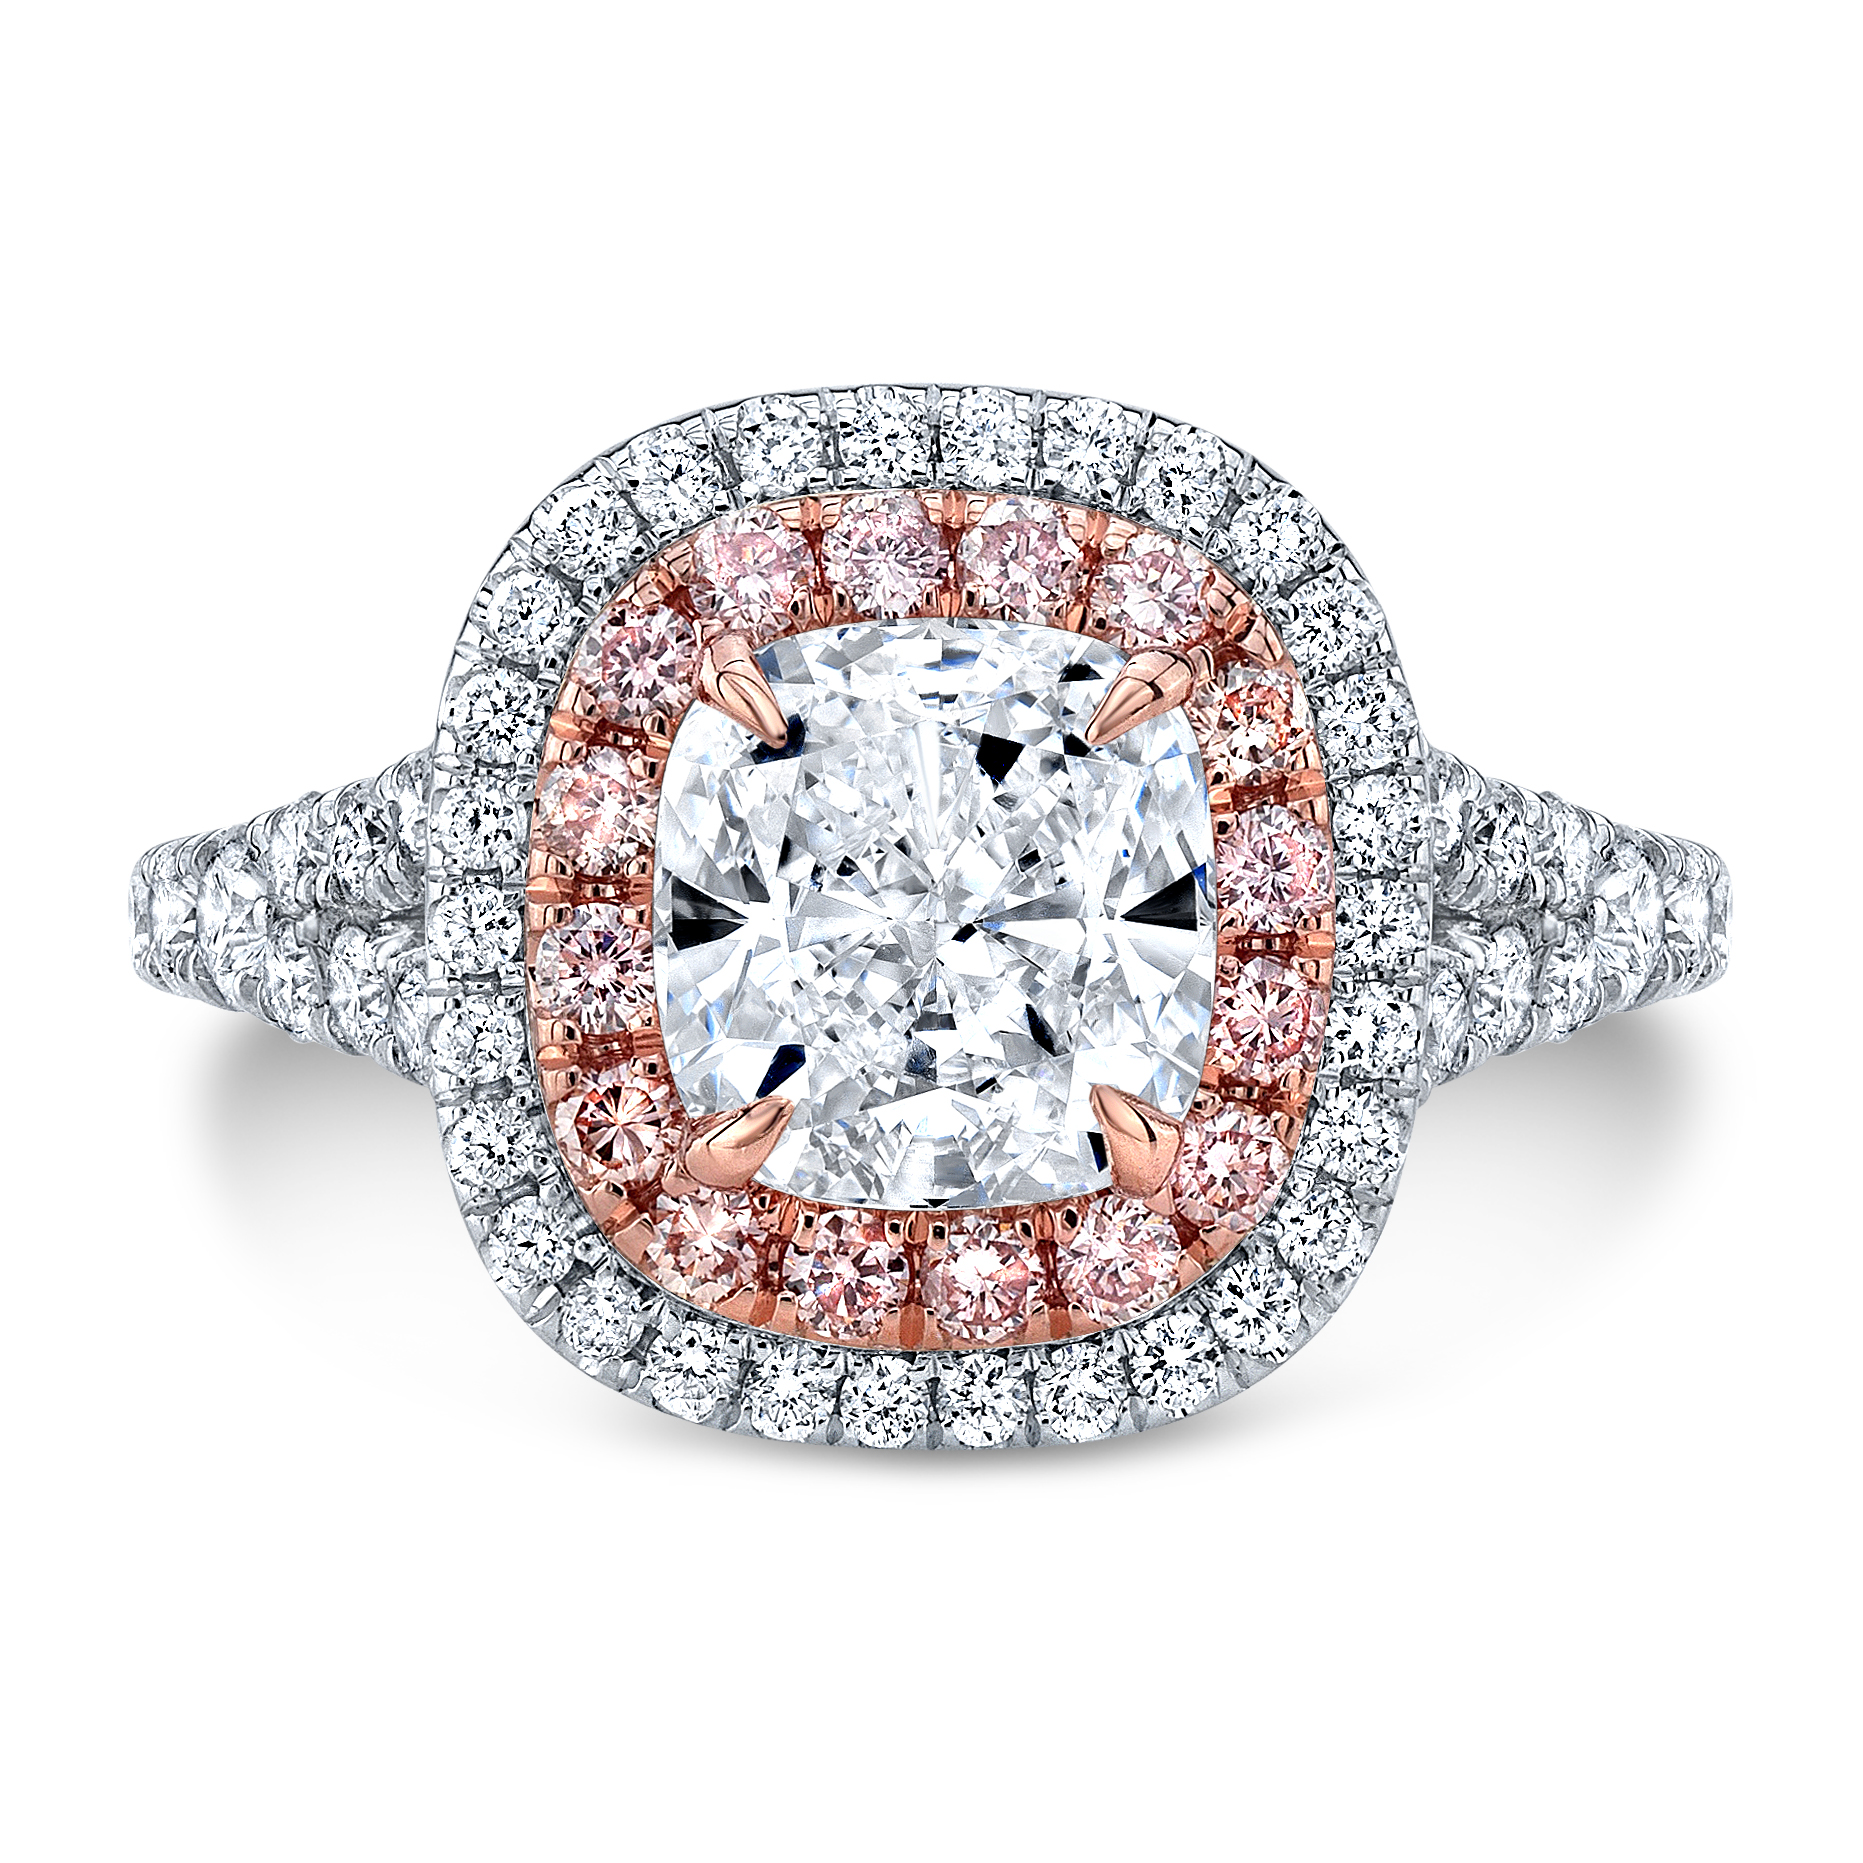 Double Halo Split Shank with Pink Diamonds Engagement Ring Le Rêve Pink Halov in platinum 